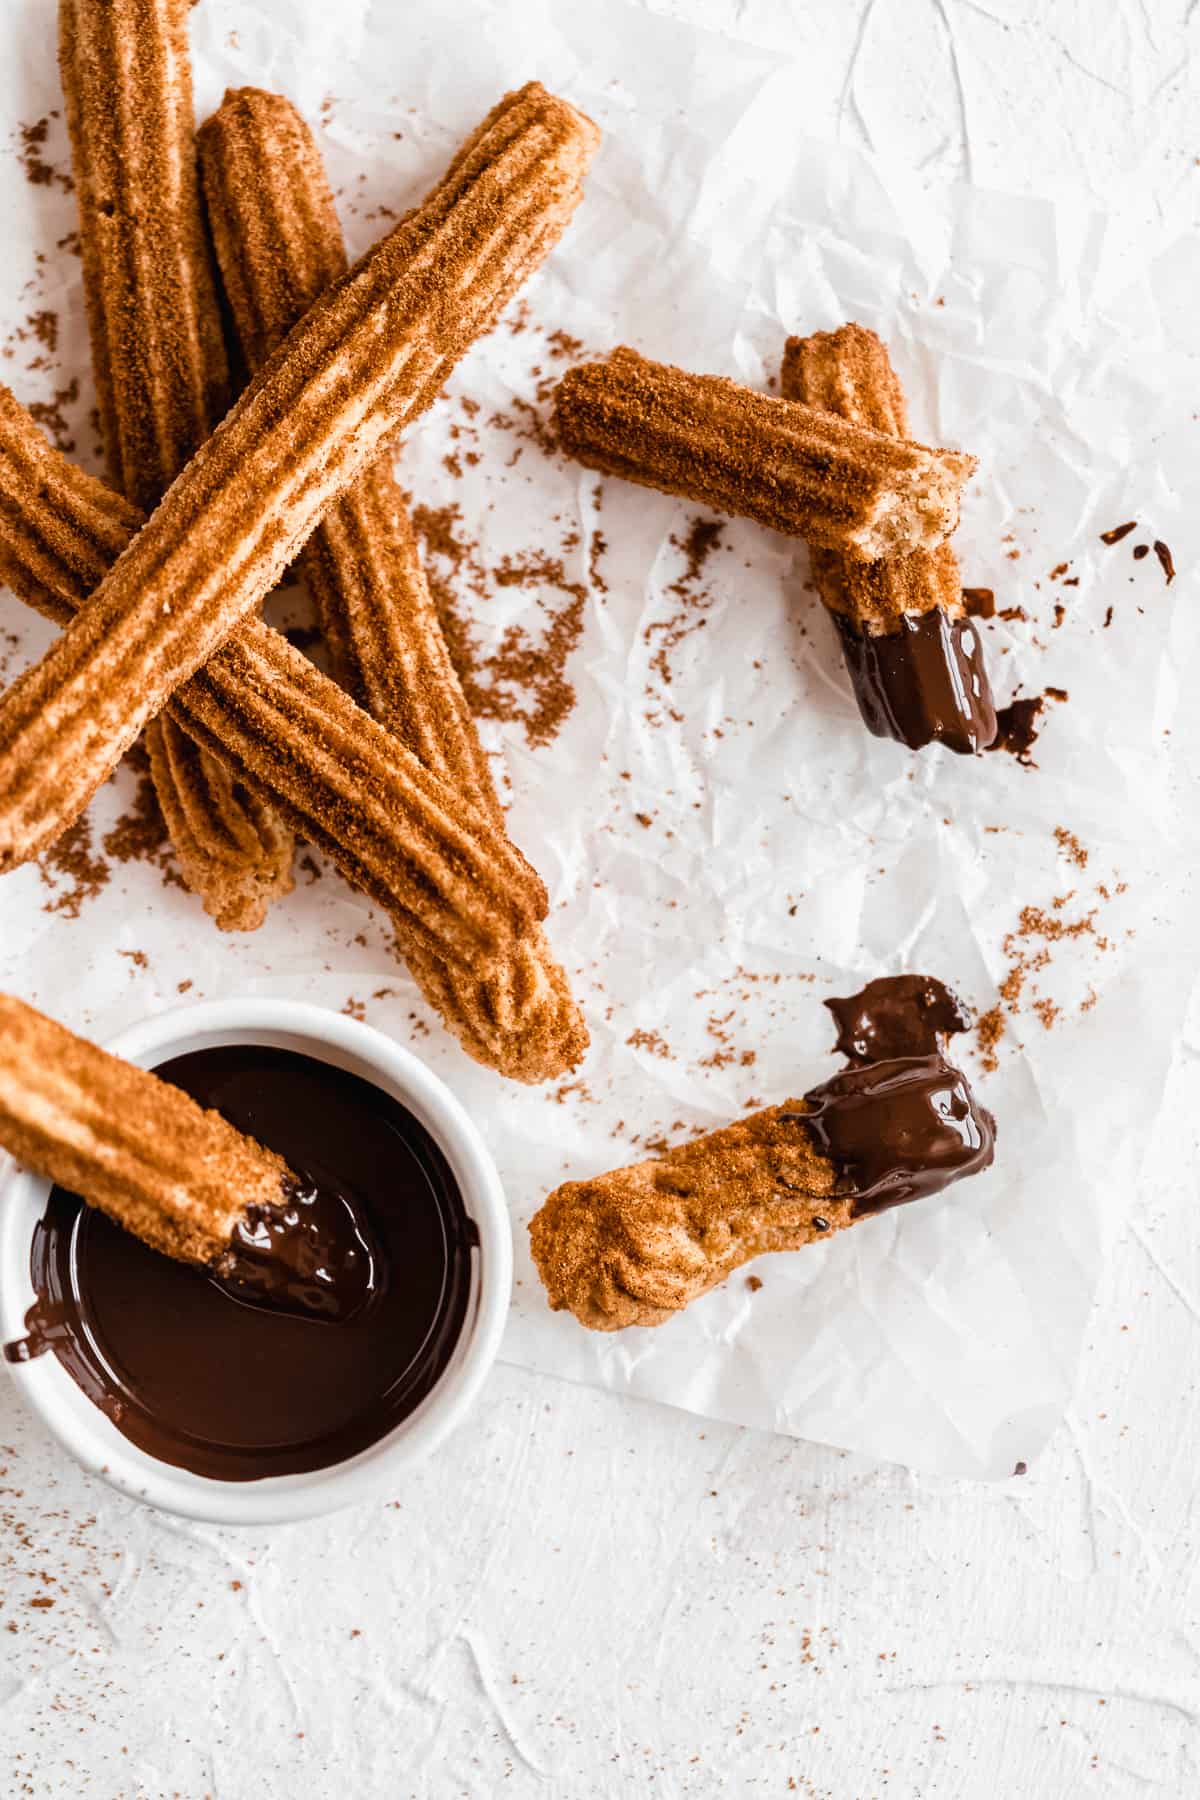 Churros scattered on a white surface with melted chocolate.